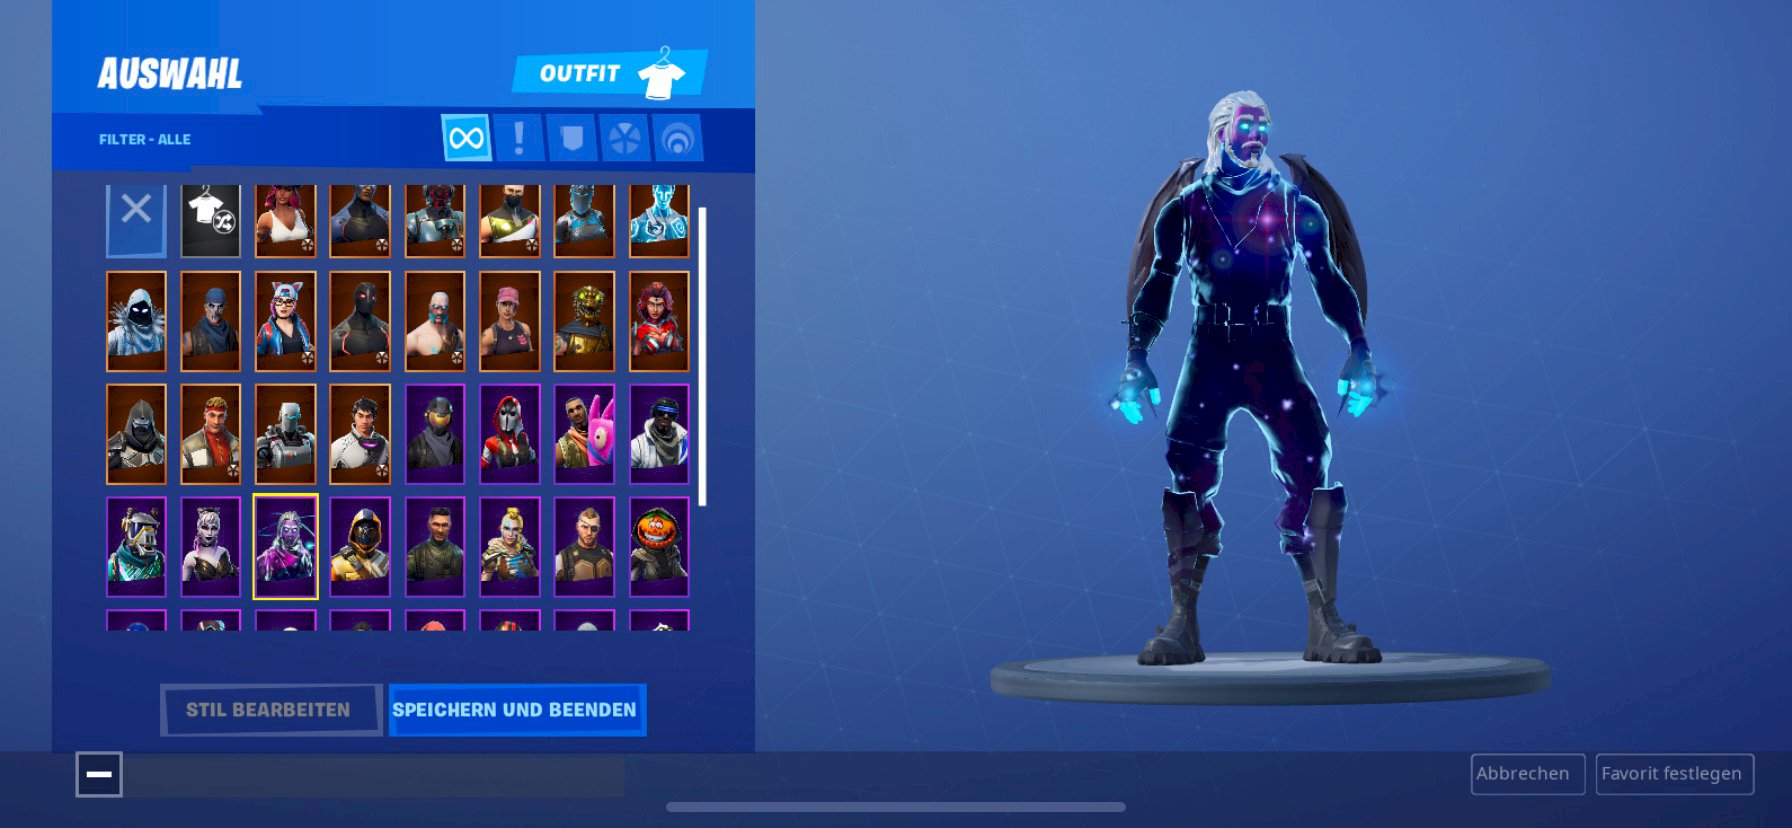 How Much Is My Account Worth With Galaxy Skin And Save The World Re Fortnite